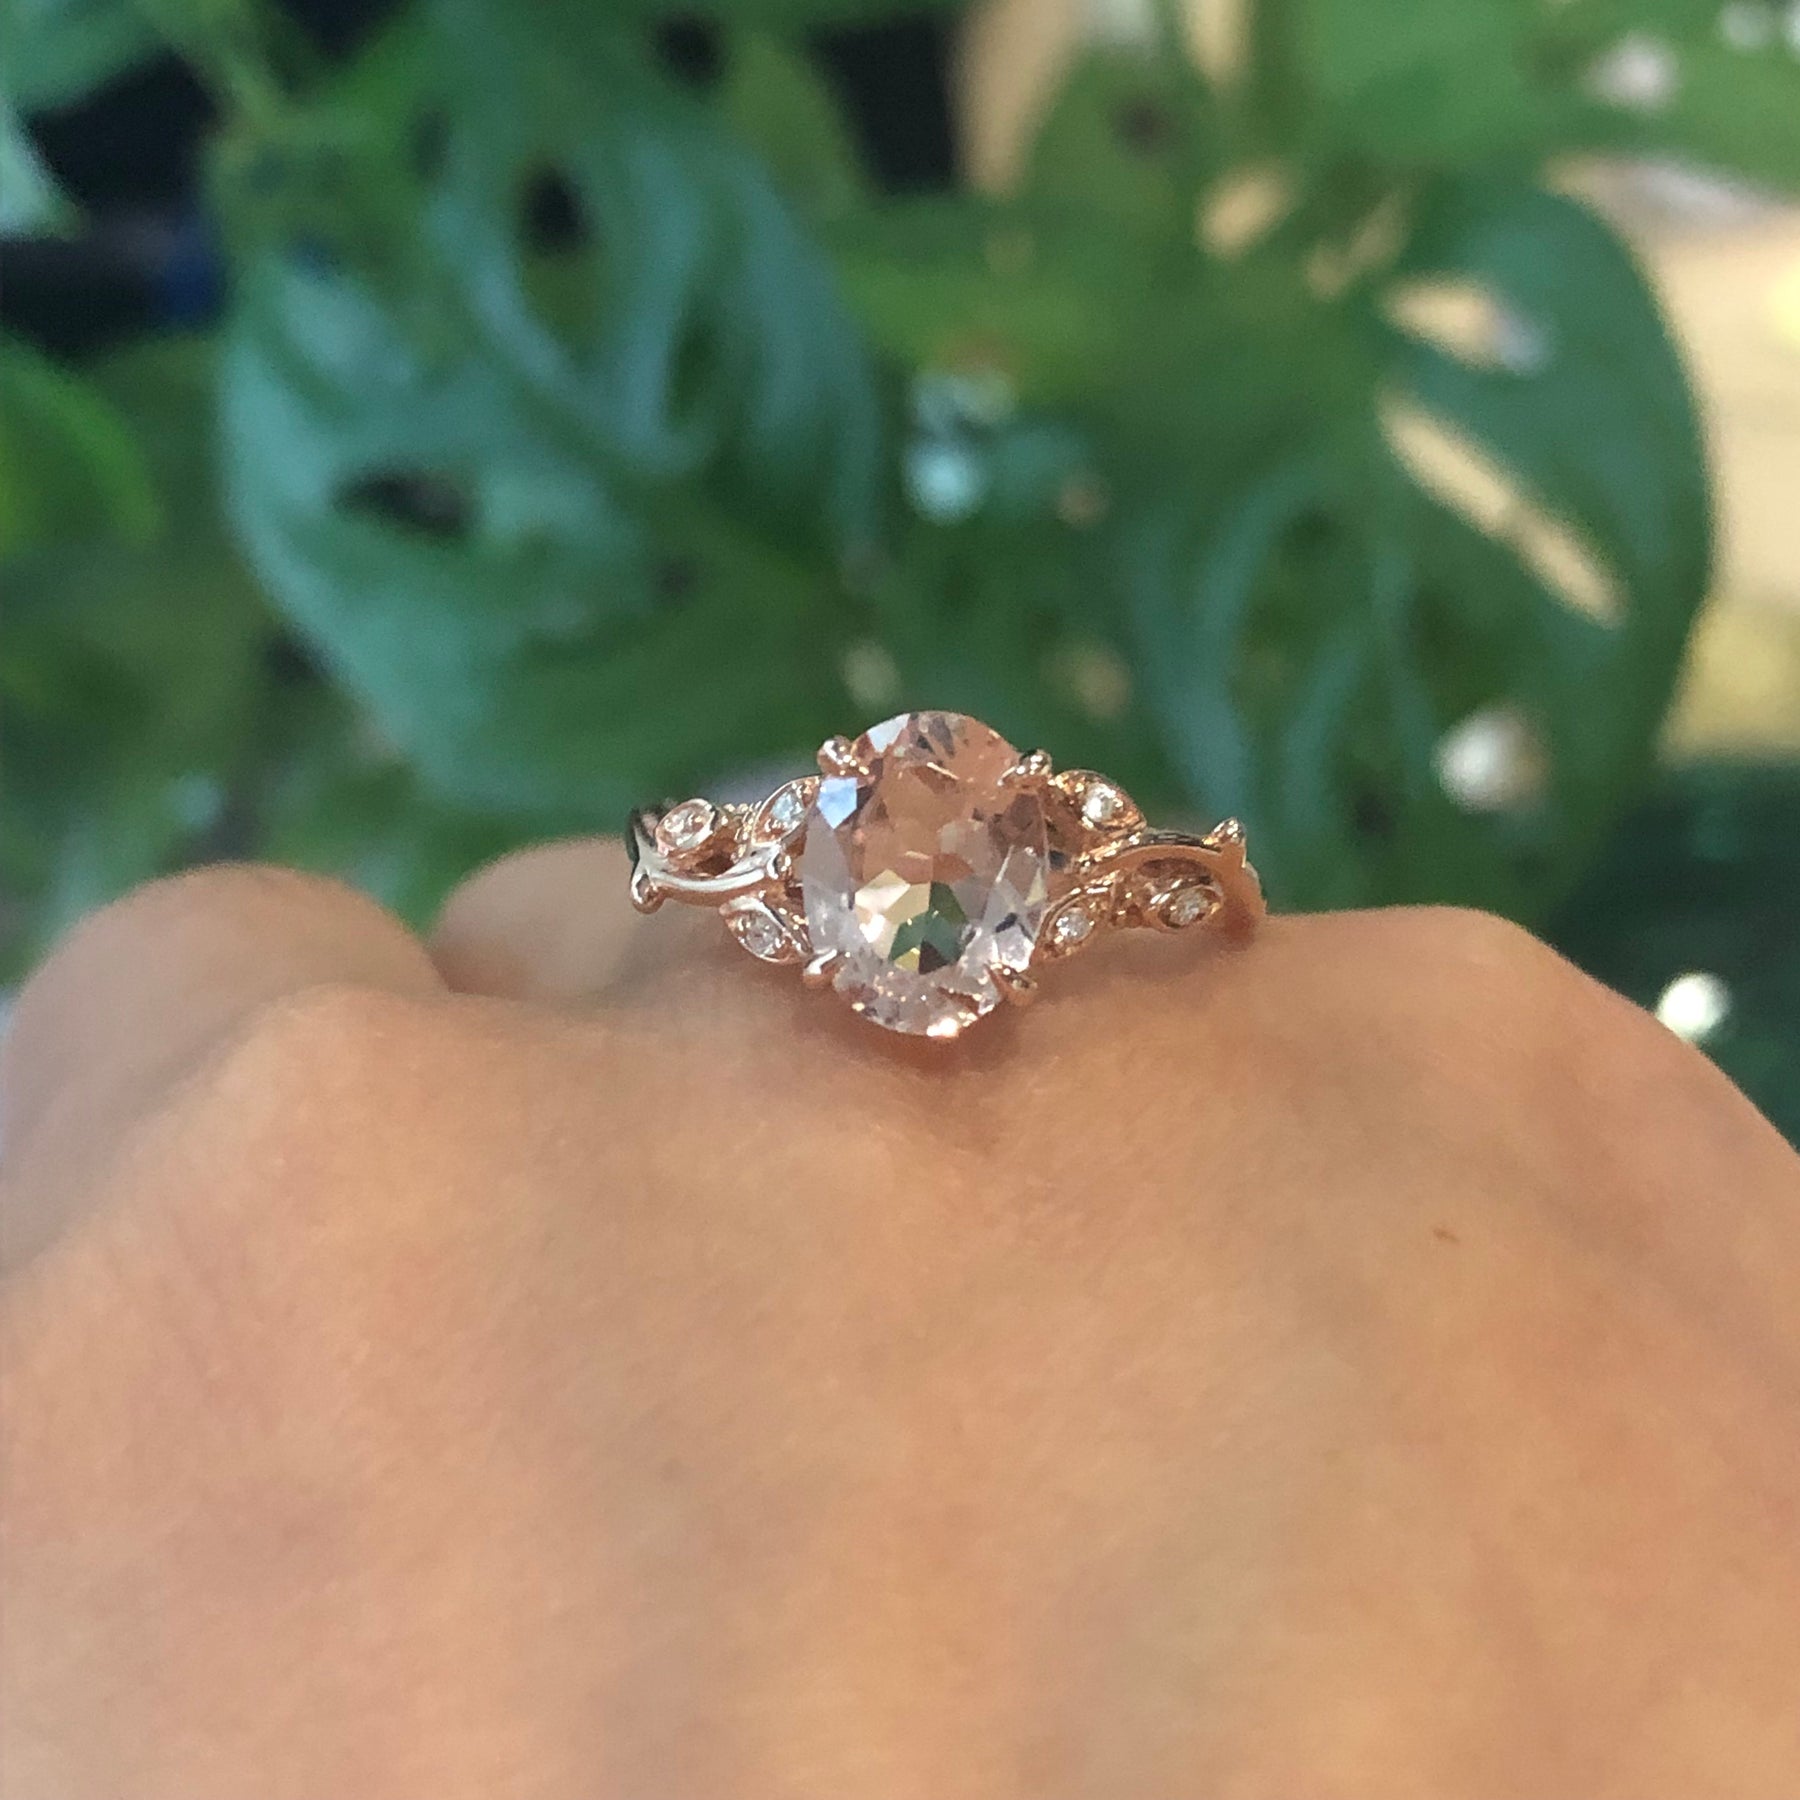 Reserved for GY- Oval Solitaire Morganite Engagement Ring 14K Rose Gold